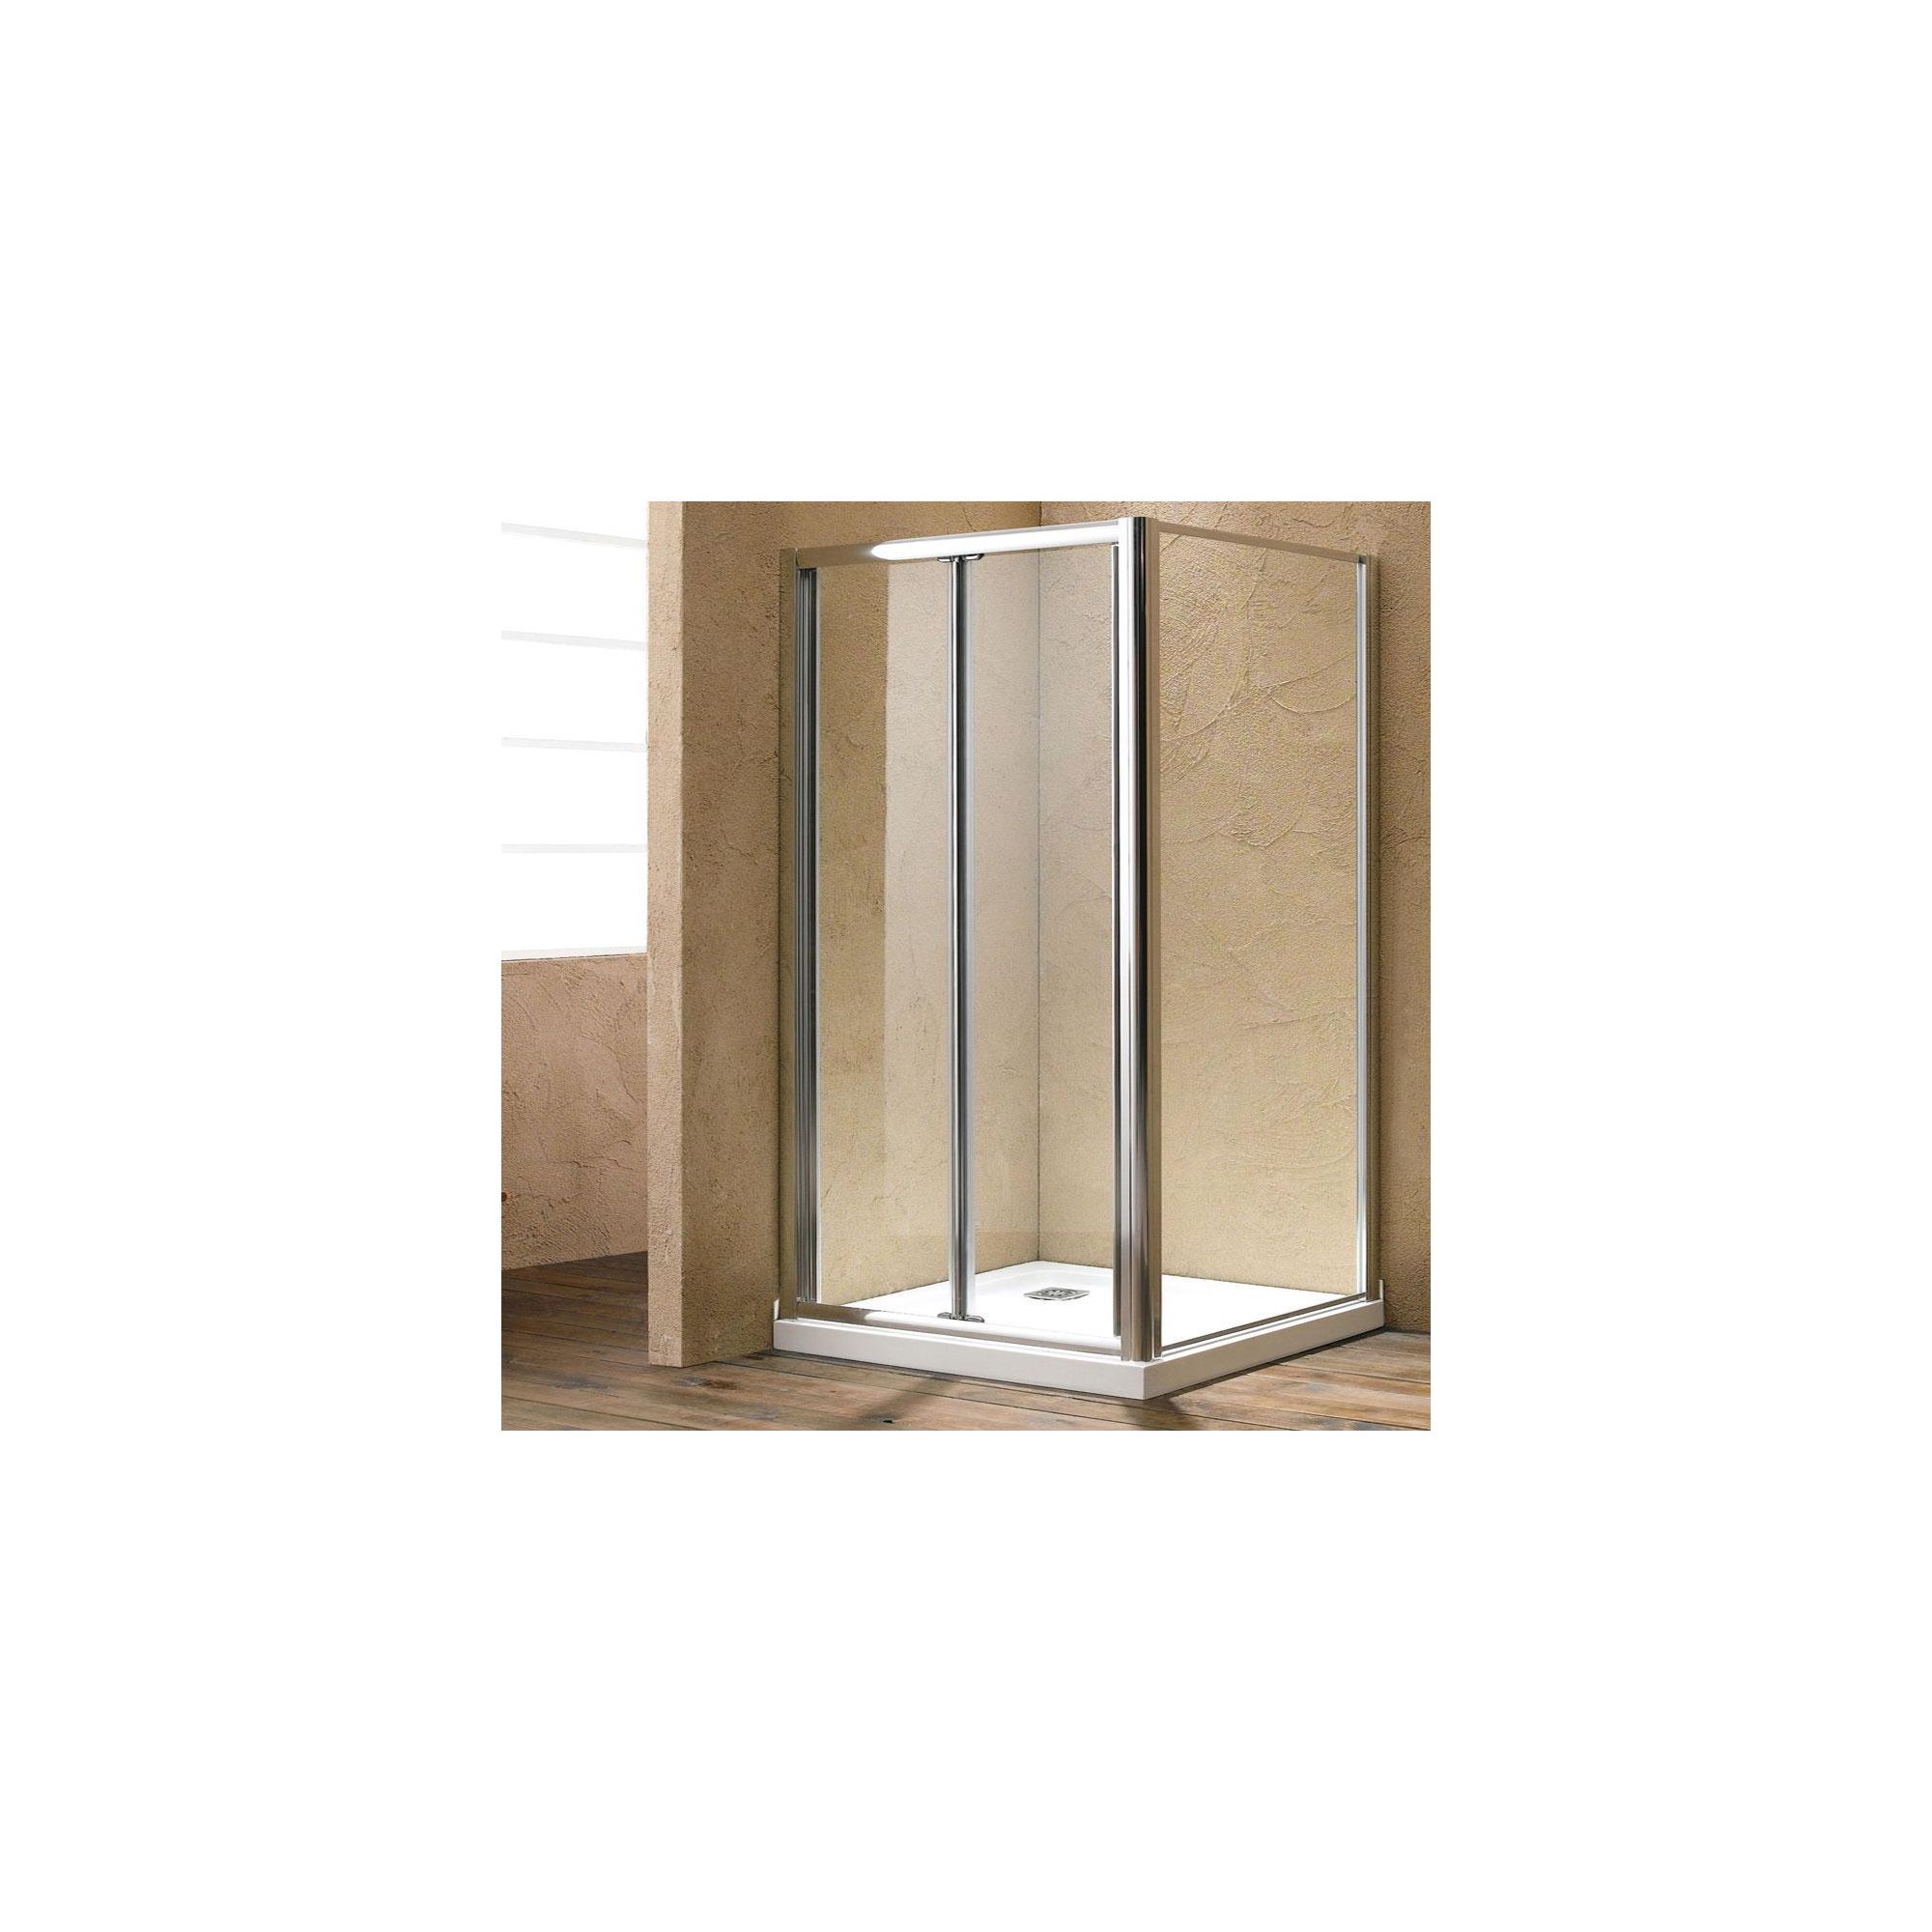 Duchy Style Single Bi-Fold Door Shower Enclosure, 800mm x 700mm, 6mm Glass, Low Profile Tray at Tescos Direct